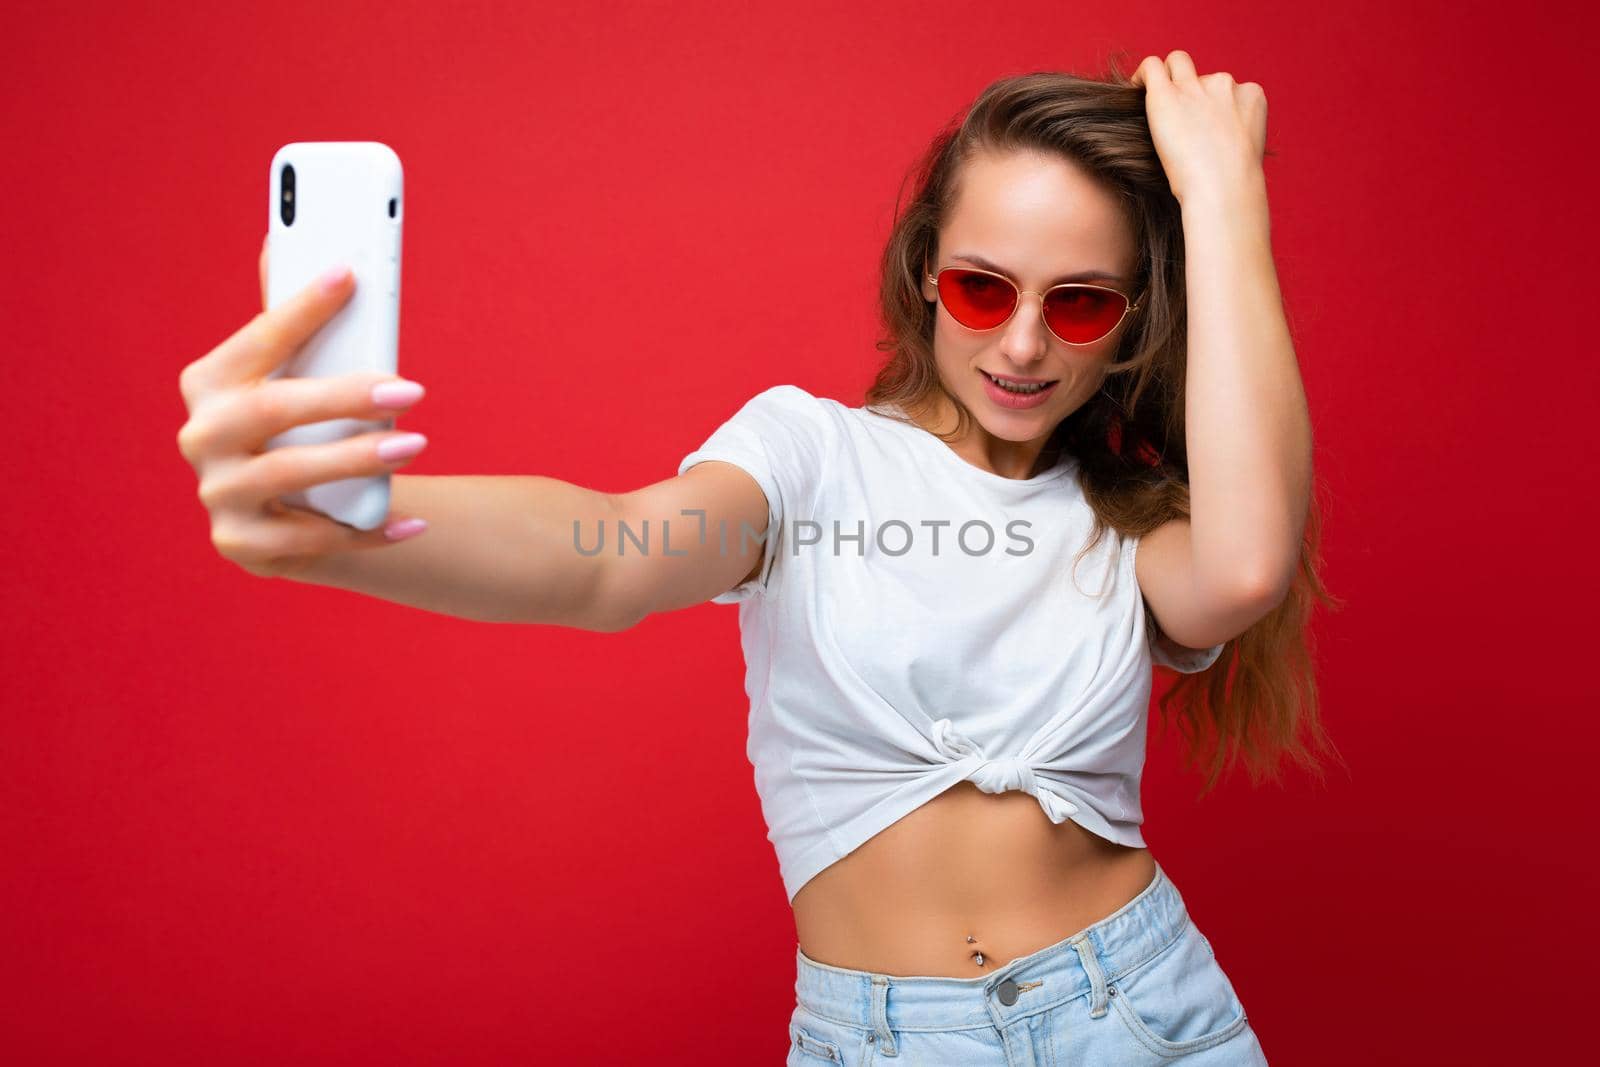 sexy blonde woman holding mobile phone taking selfie photo using smartphone camera wearing sunglasses everyday stylish outfit isolated over colorful wall background looking at device screen.